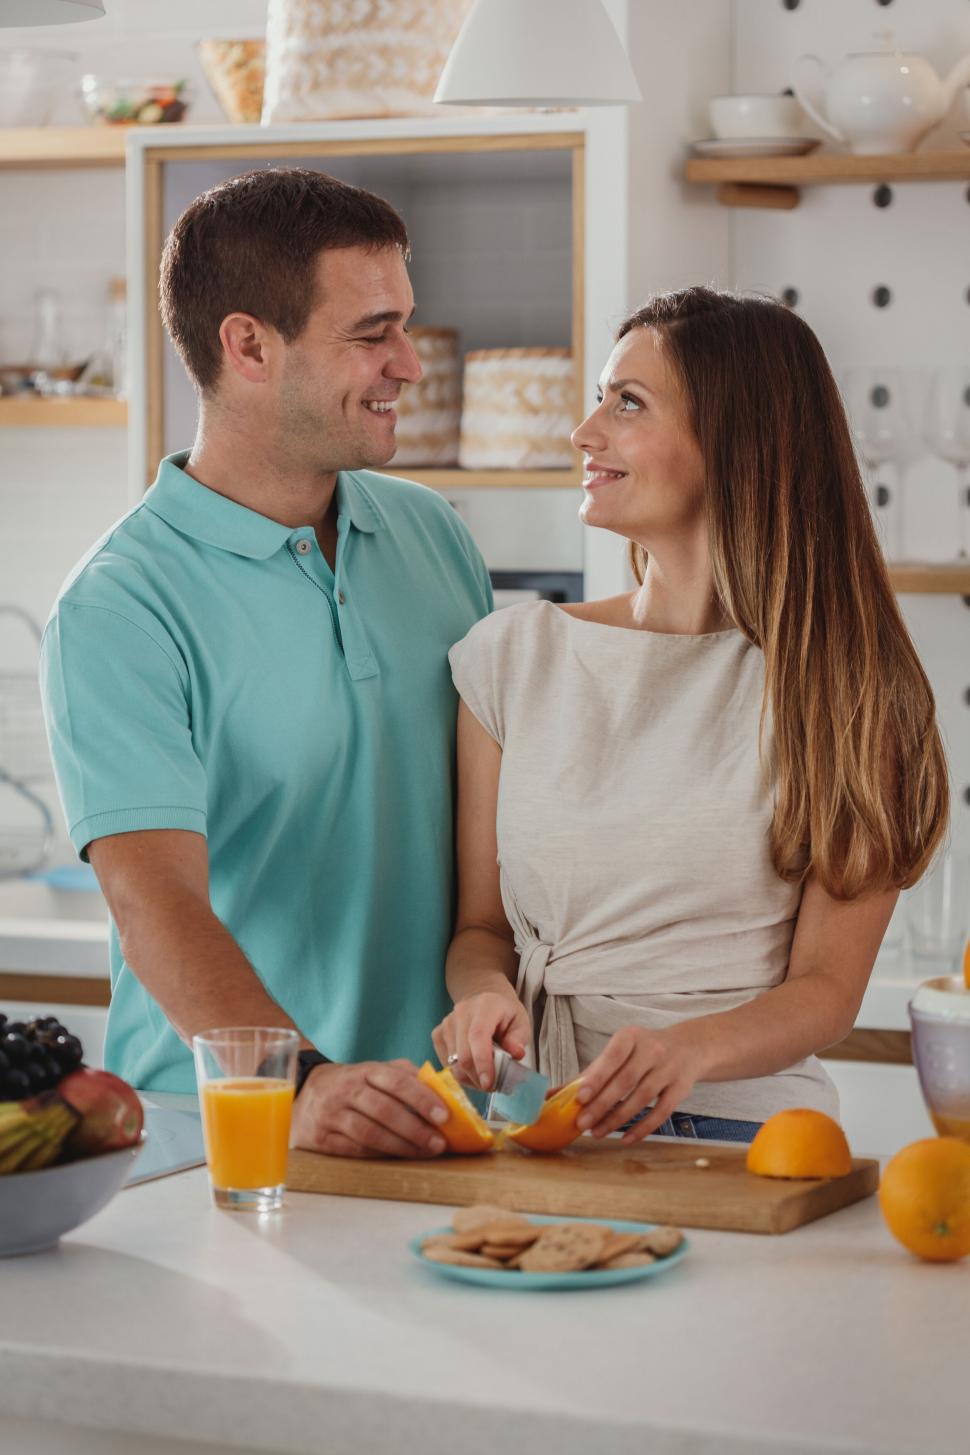 Free Image of Couple preparing breakfast together 